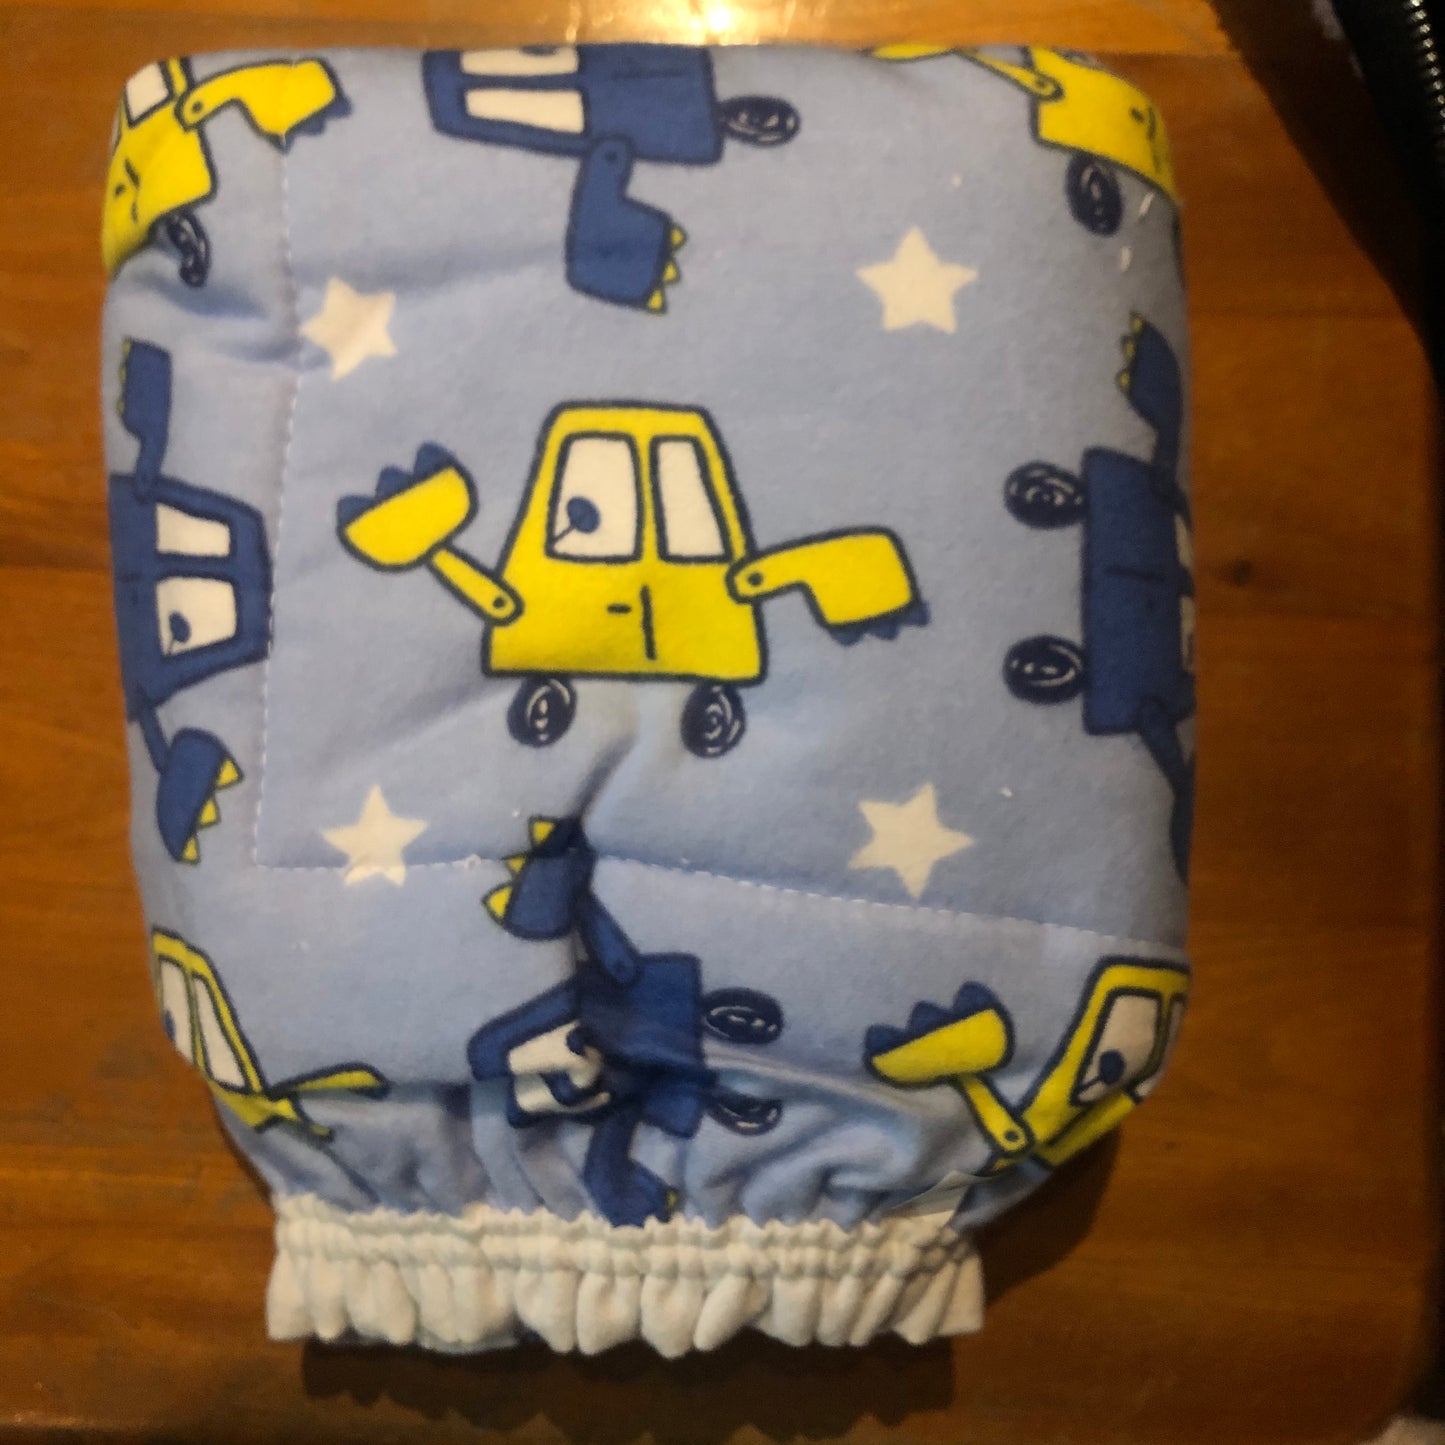 The Blue Lil' Diggers Cloth Diaper with Velcro Closure.